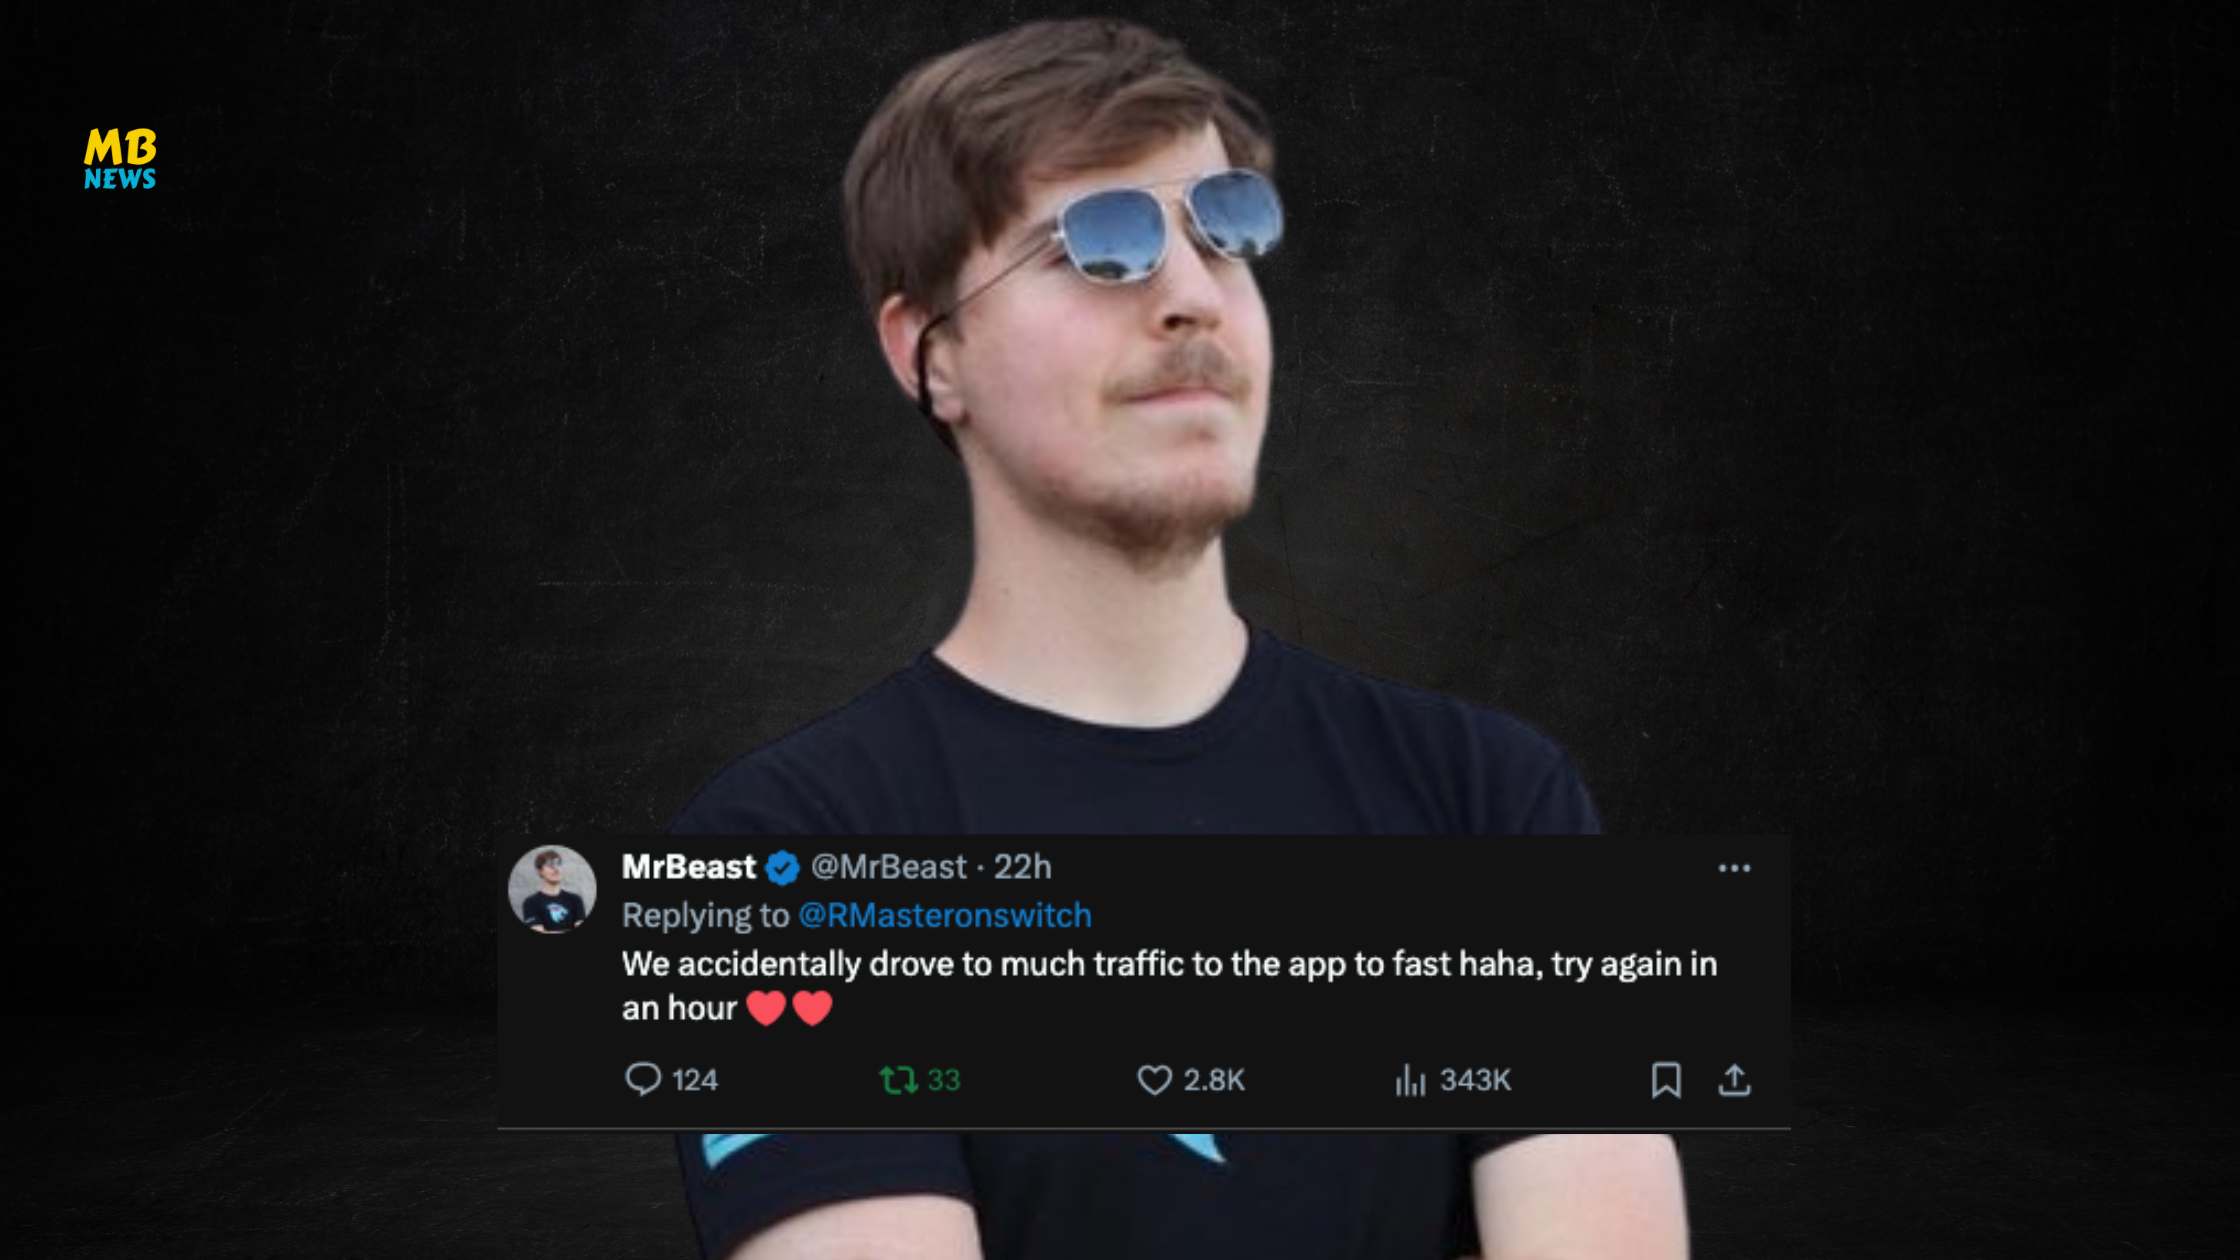 MrBeast Apologizes as Shop App Faces Technical Glitch Due to Fan Traffic: "try again in an hour"